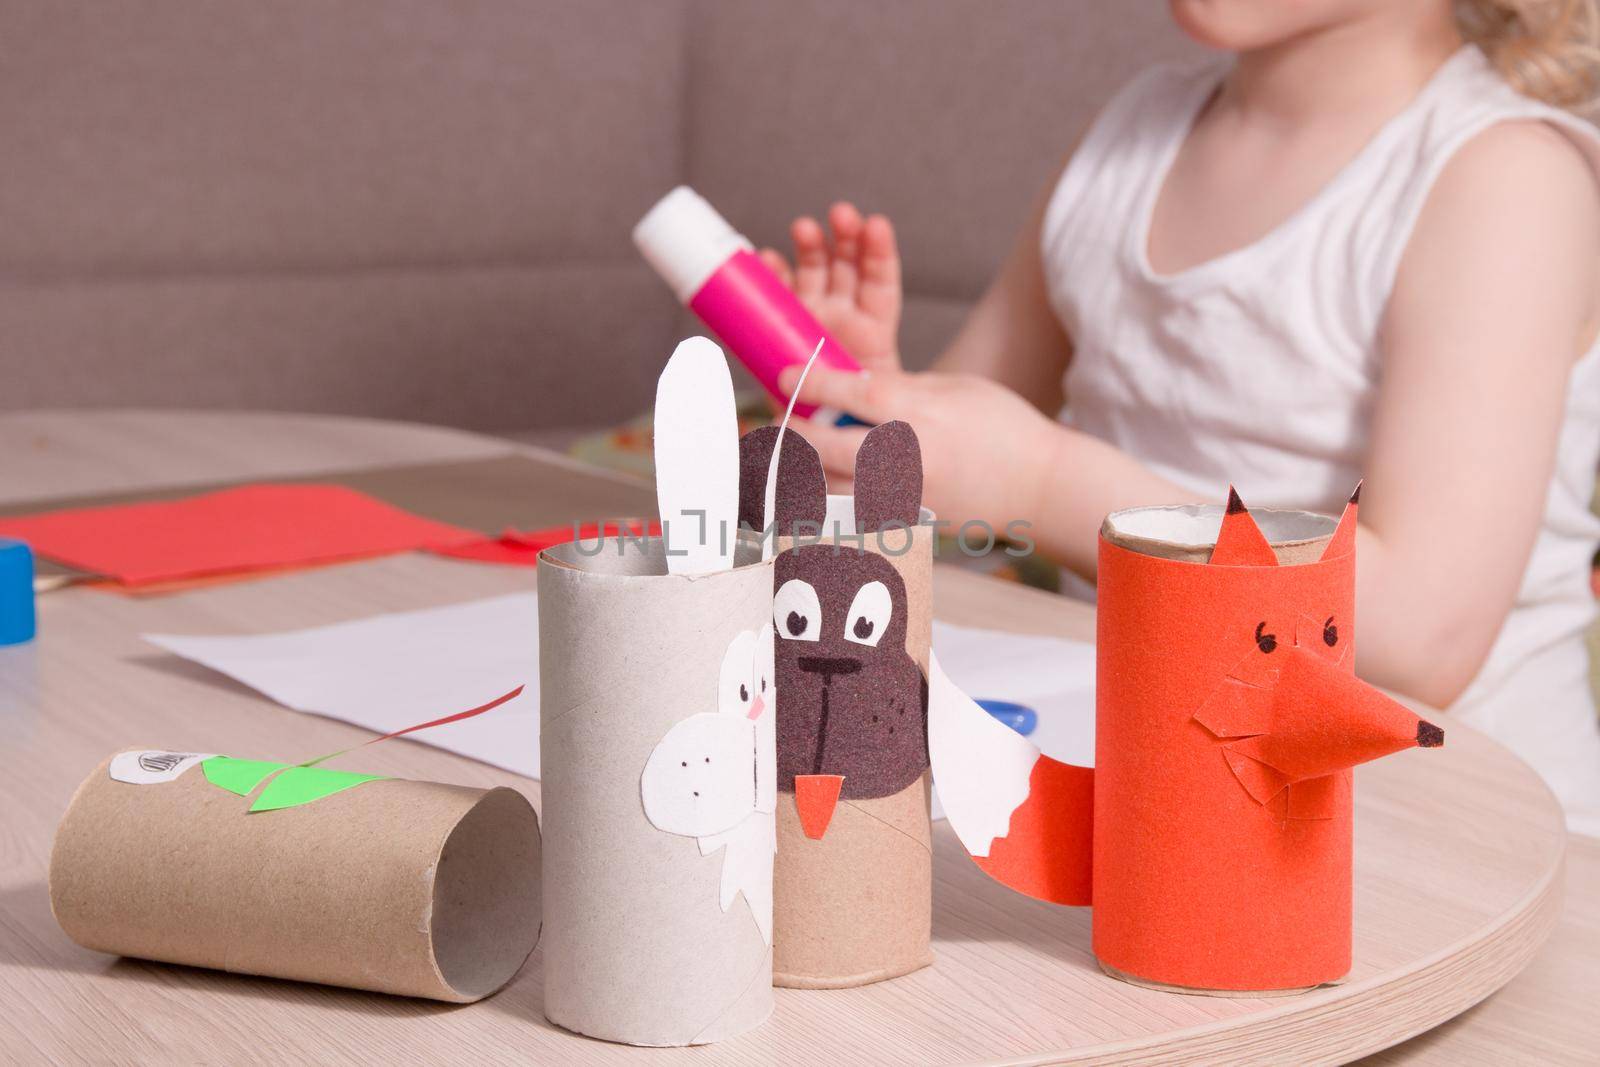 characters of fairy tales from toilet paper bushes and a small child in the background, colored paper crafts, what to do with the child at home, quarantine and self-isolation